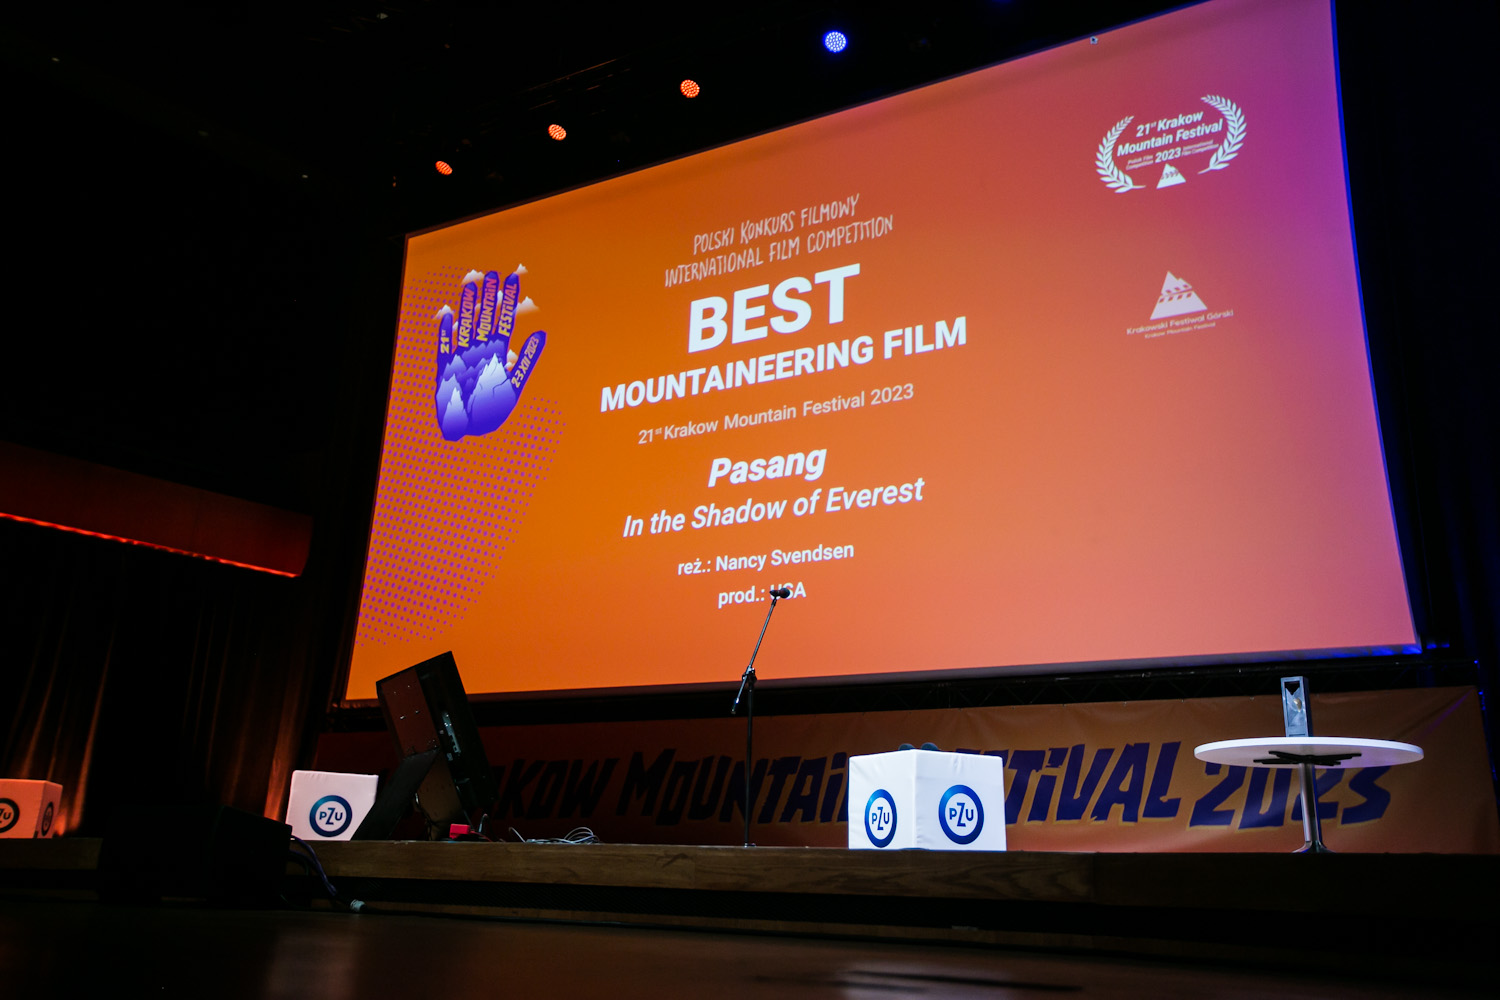 Pasang: In the Shadow of Everest is the Winner of the Best Mountain Film at the 2023 Krakow Film Festival in Poland